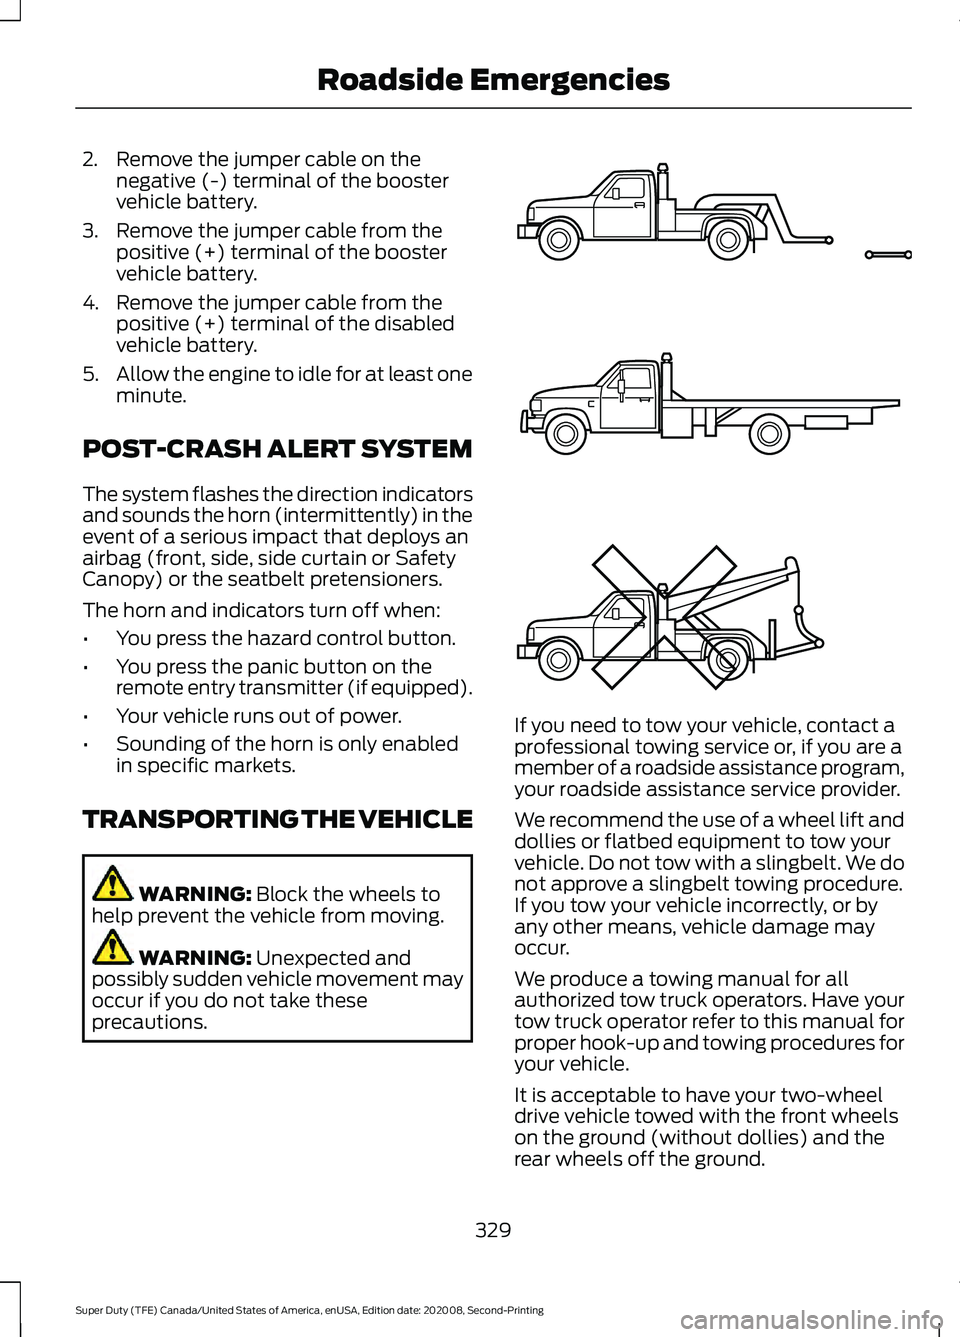 FORD SUPER DUTY 2021  Owners Manual 2. Remove the jumper cable on the
negative (-) terminal of the booster
vehicle battery.
3. Remove the jumper cable from the positive (+) terminal of the booster
vehicle battery.
4. Remove the jumper c